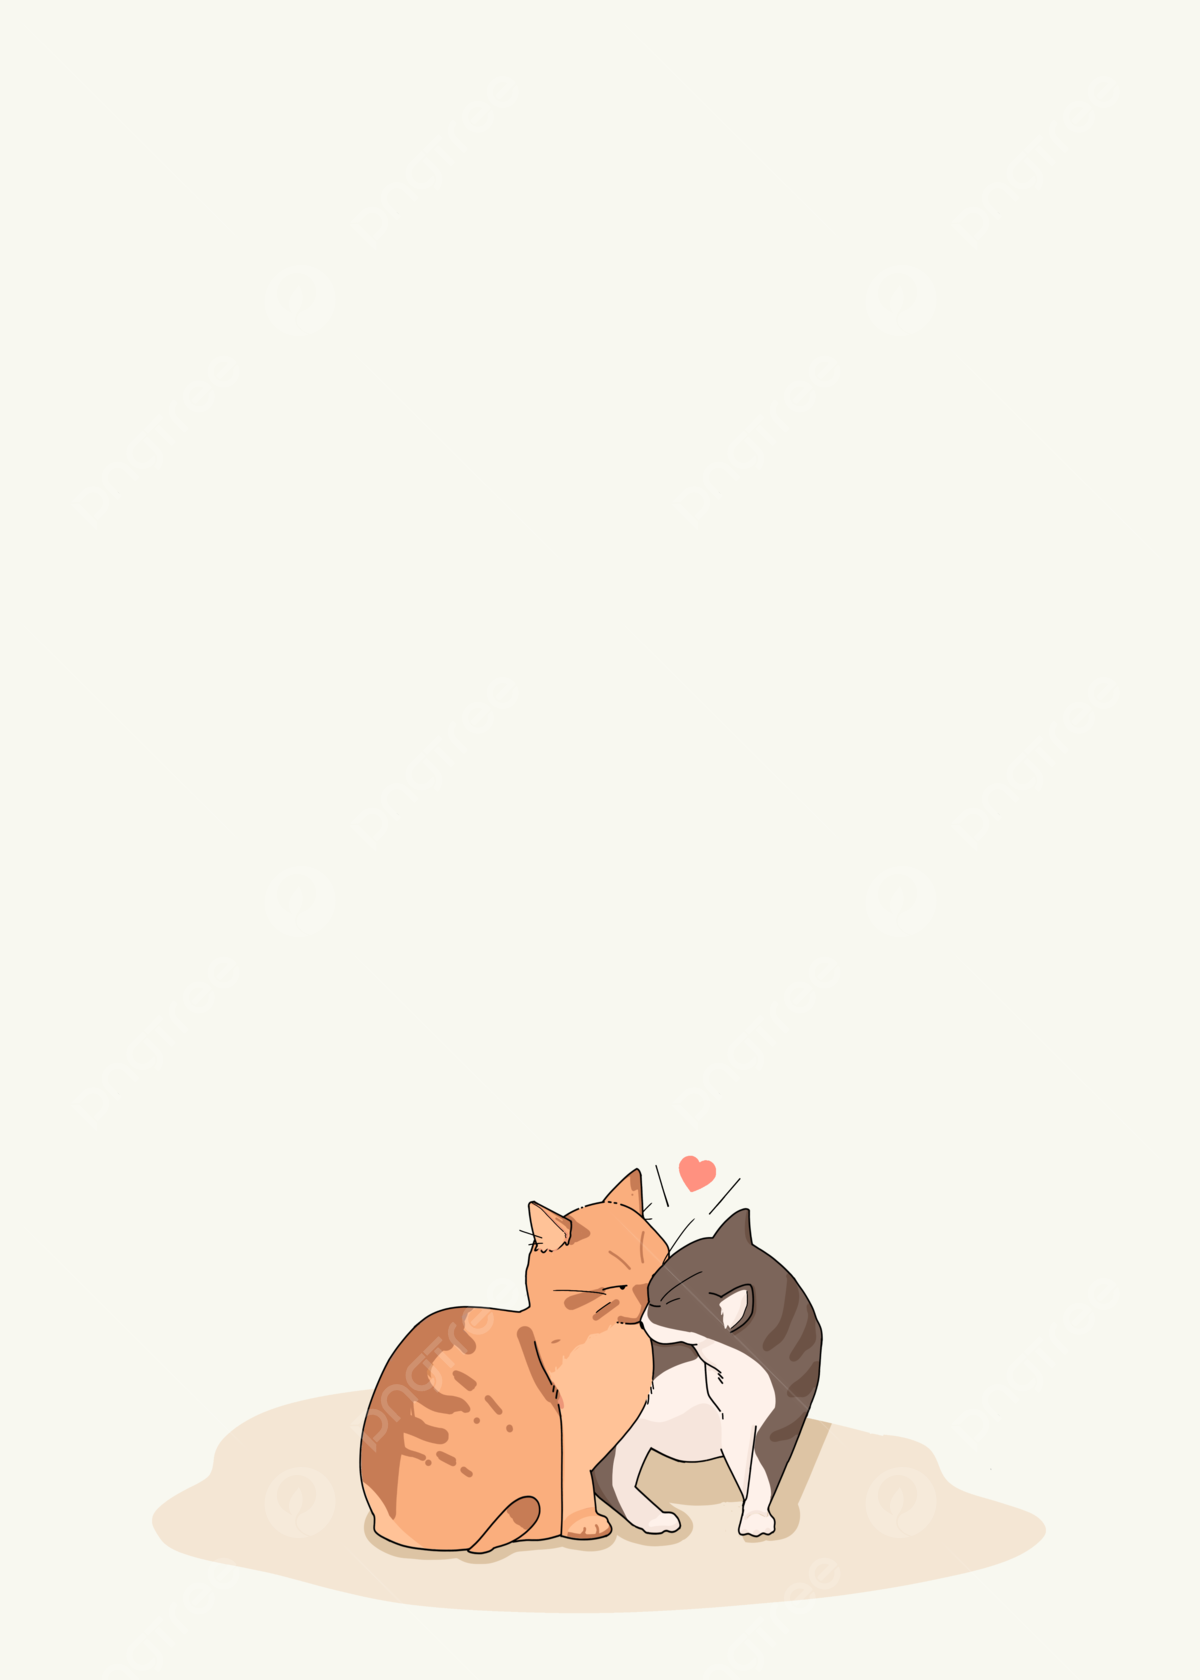 Cat cartoon wallpaper orange background cute animal cat background image for free download